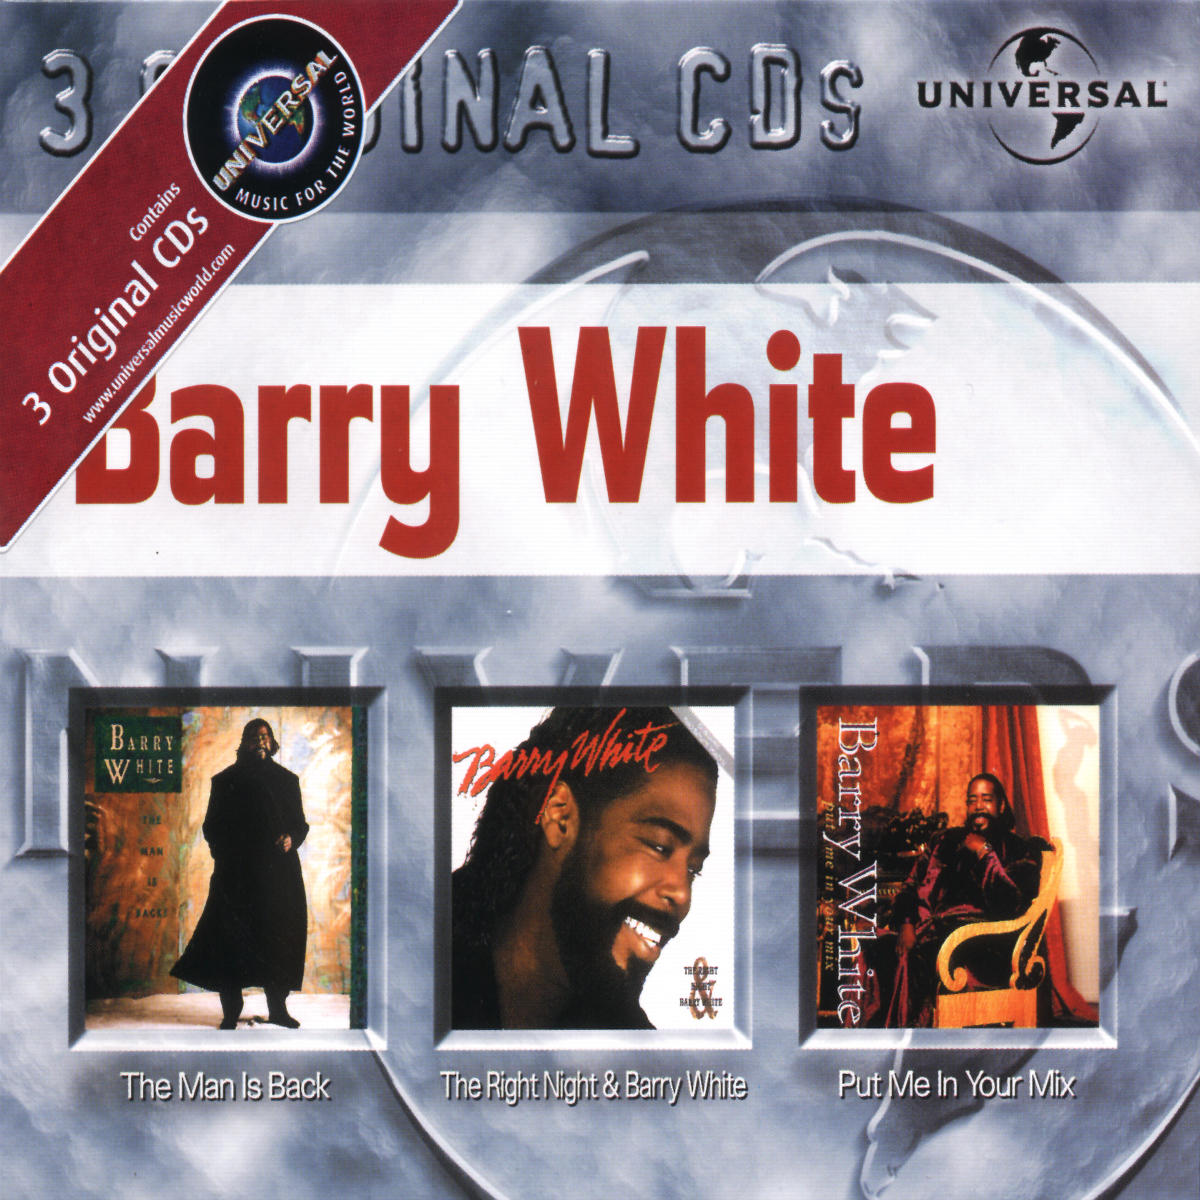 Песню бари вайт. Barry White the Ultimate collection. Barry White the man is back. Barry White - 1987 - the right Night & Barry White. Barry White - 1991 - put me in your Mix.